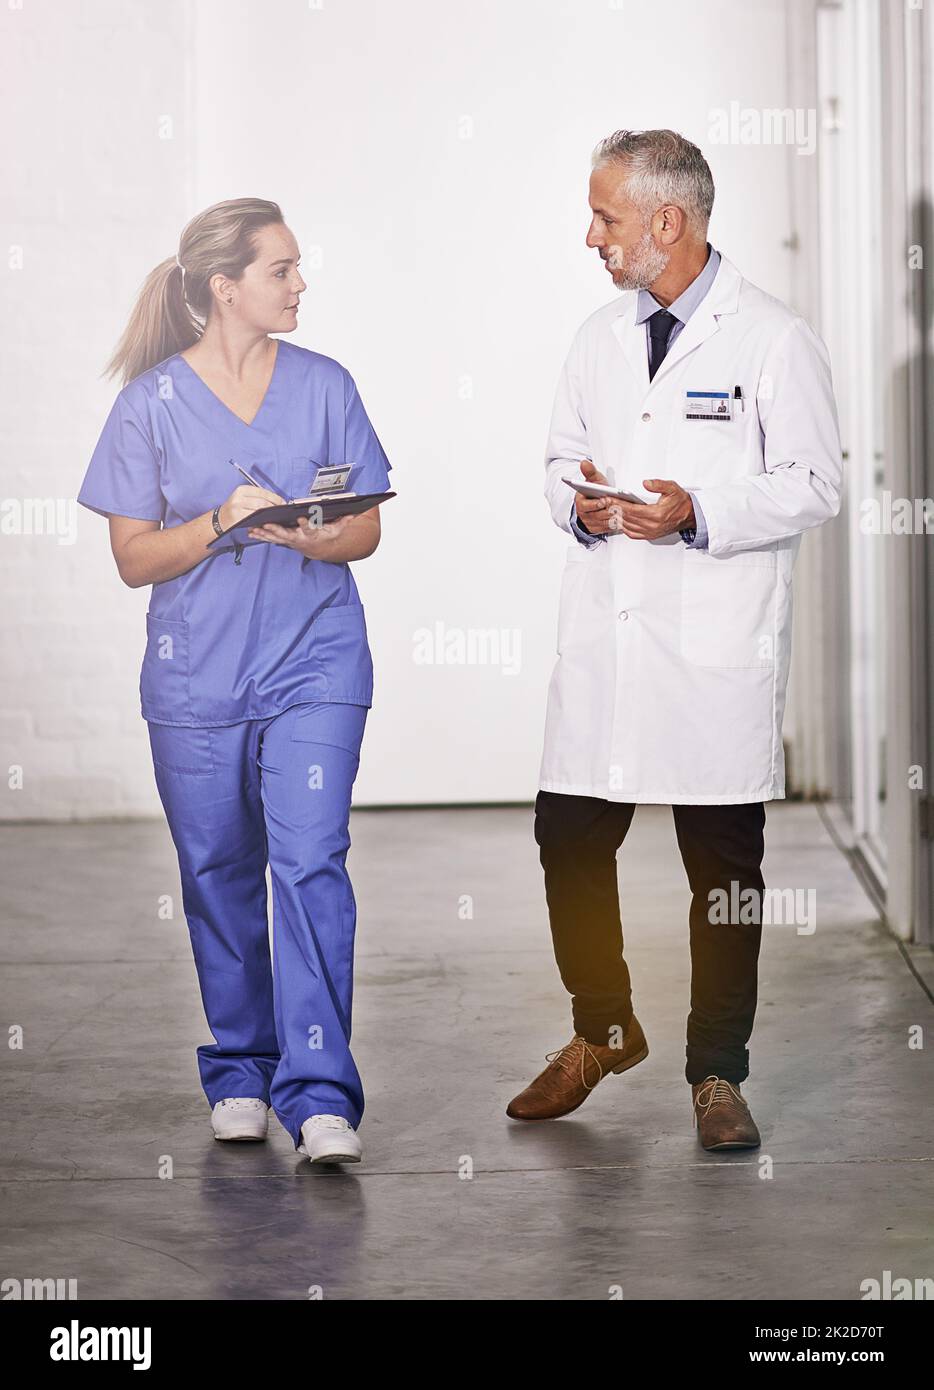 Passing on some of his expertise. Full length shot of a mature doctor teaching a female intern in the hospital corridor. Stock Photo